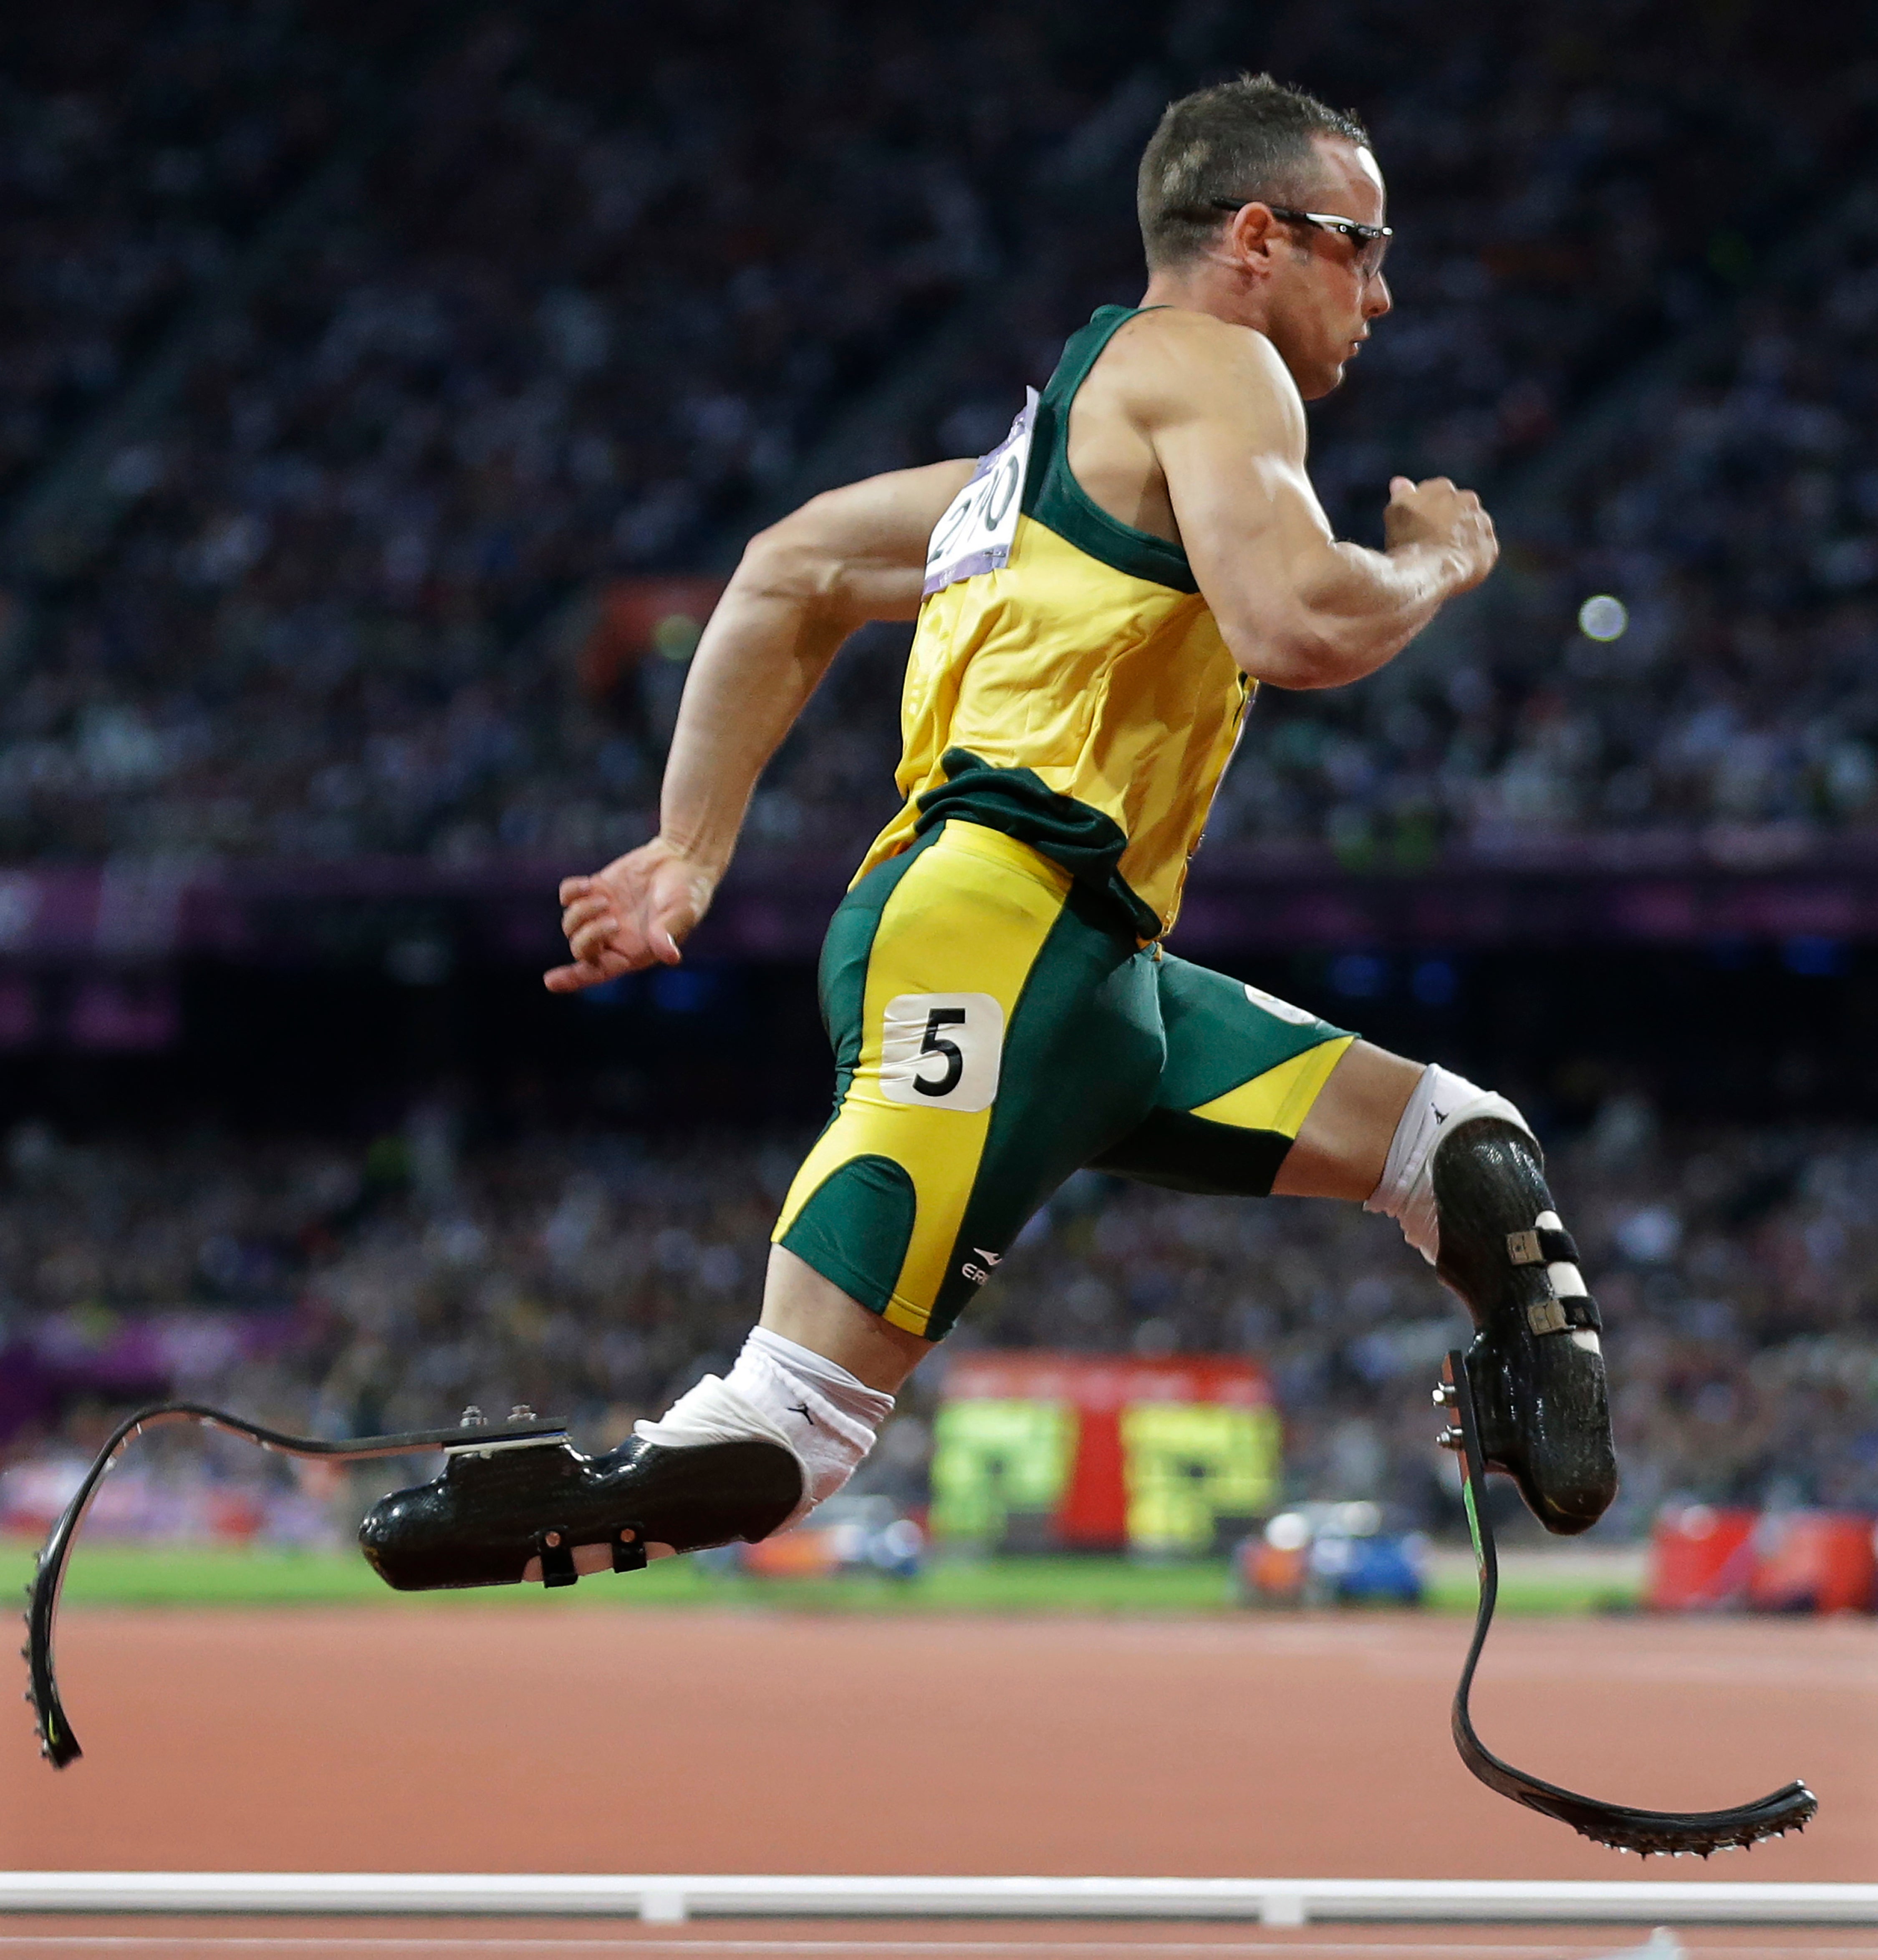 Pistorius was once the darling of the Paralympic movement for pushing for greater recognition and acceptance of disabled athletes